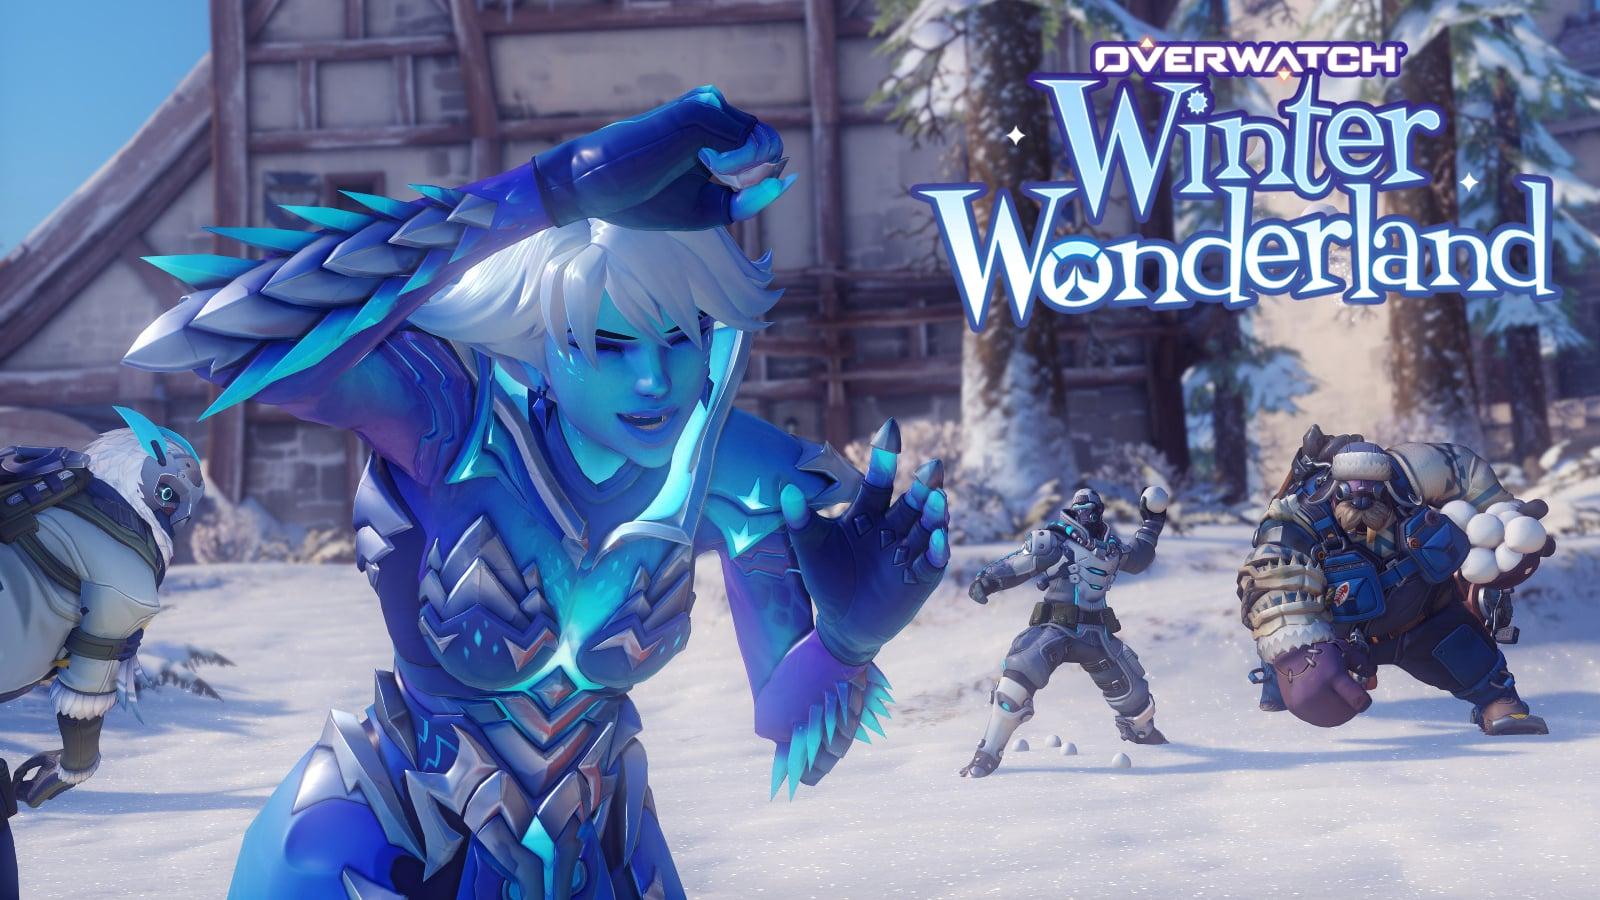 overwatch rime sombra being hit with snowballs by roadhog and ana during winter wonderland christmas event